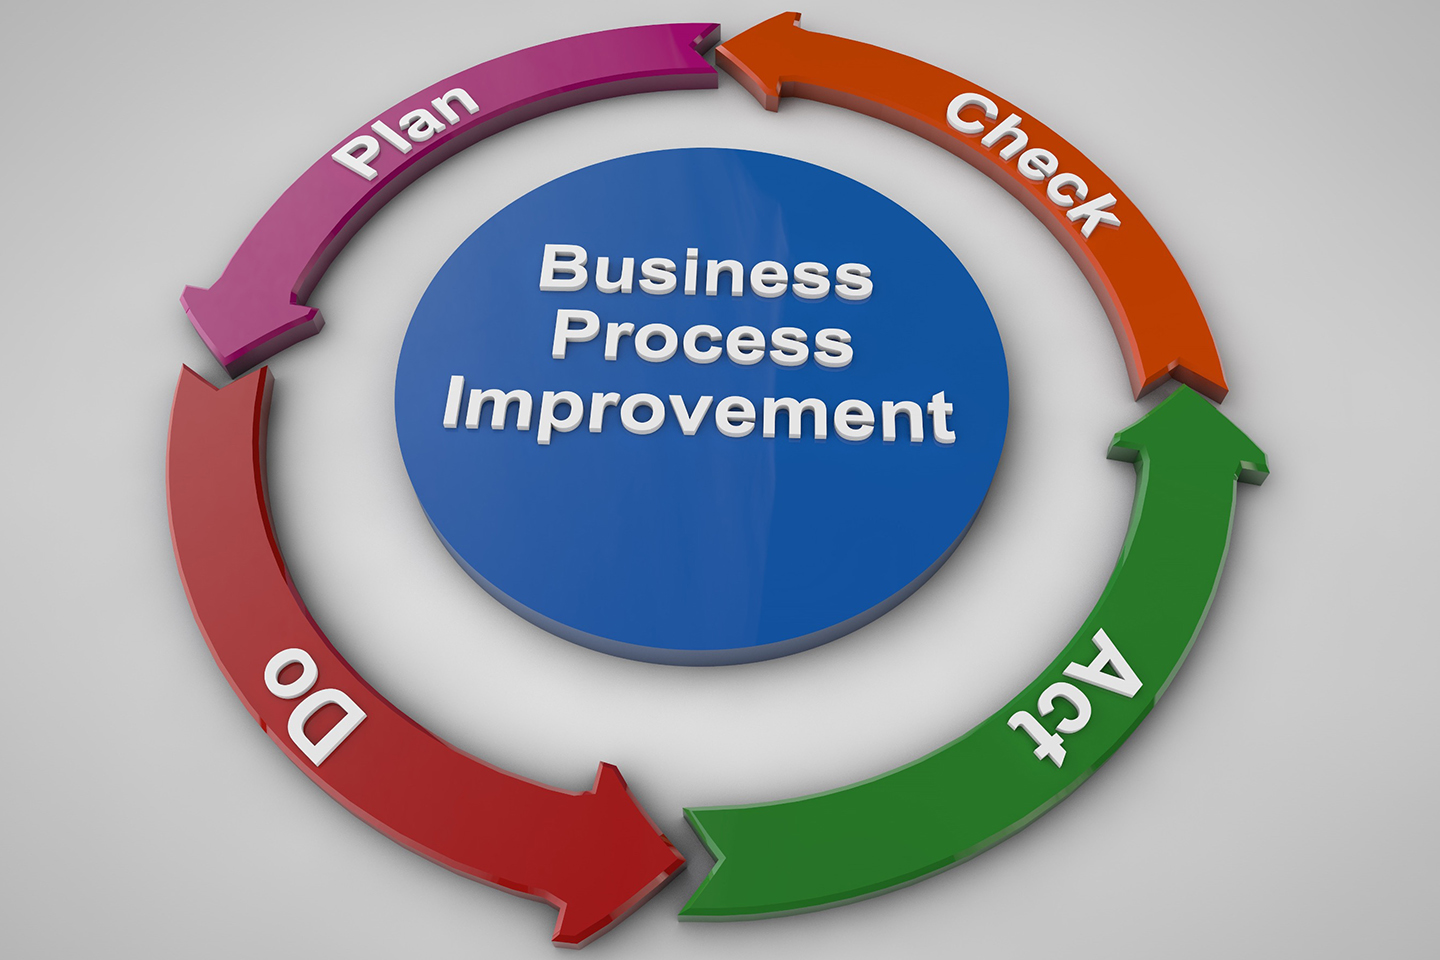 How to Implement Business Process Improvement